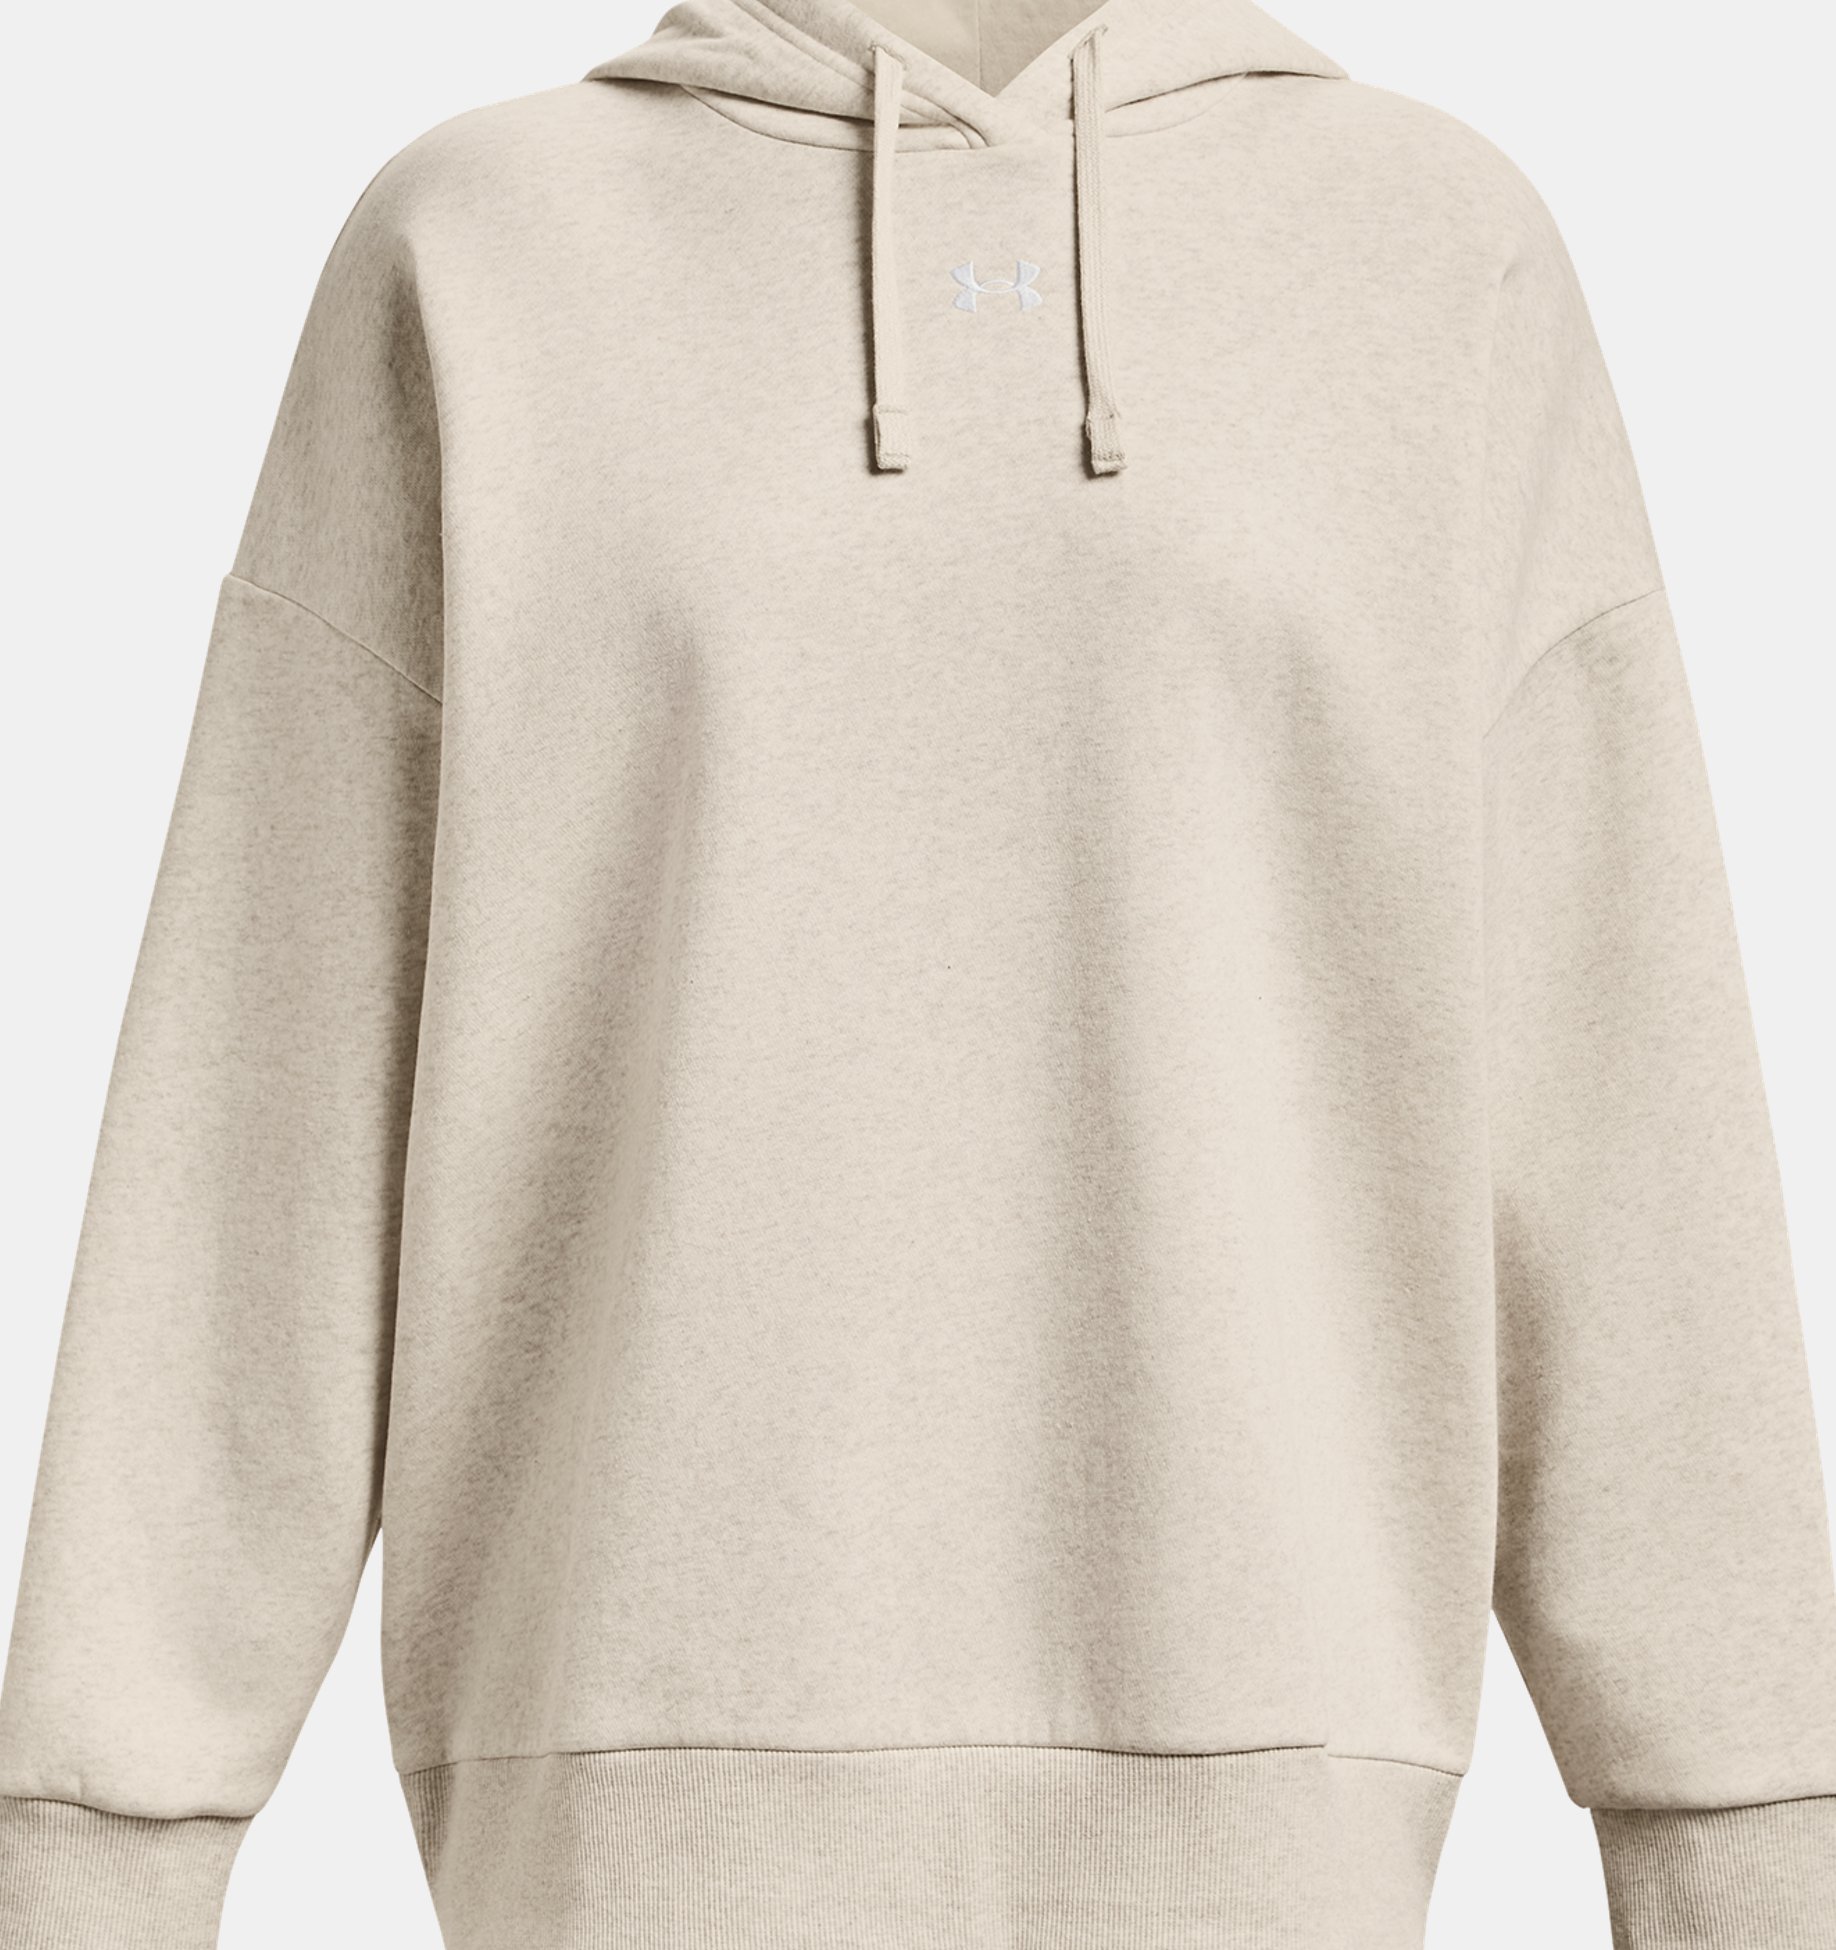 https://underarmour.scene7.com/is/image/Underarmour/PS1379493-784_HF?rp=standard-0pad|pdpZoomDesktop&scl=0.72&fmt=jpg&qlt=85&resMode=sharp2&cache=on,on&bgc=f0f0f0&wid=1836&hei=1950&size=1500,1500